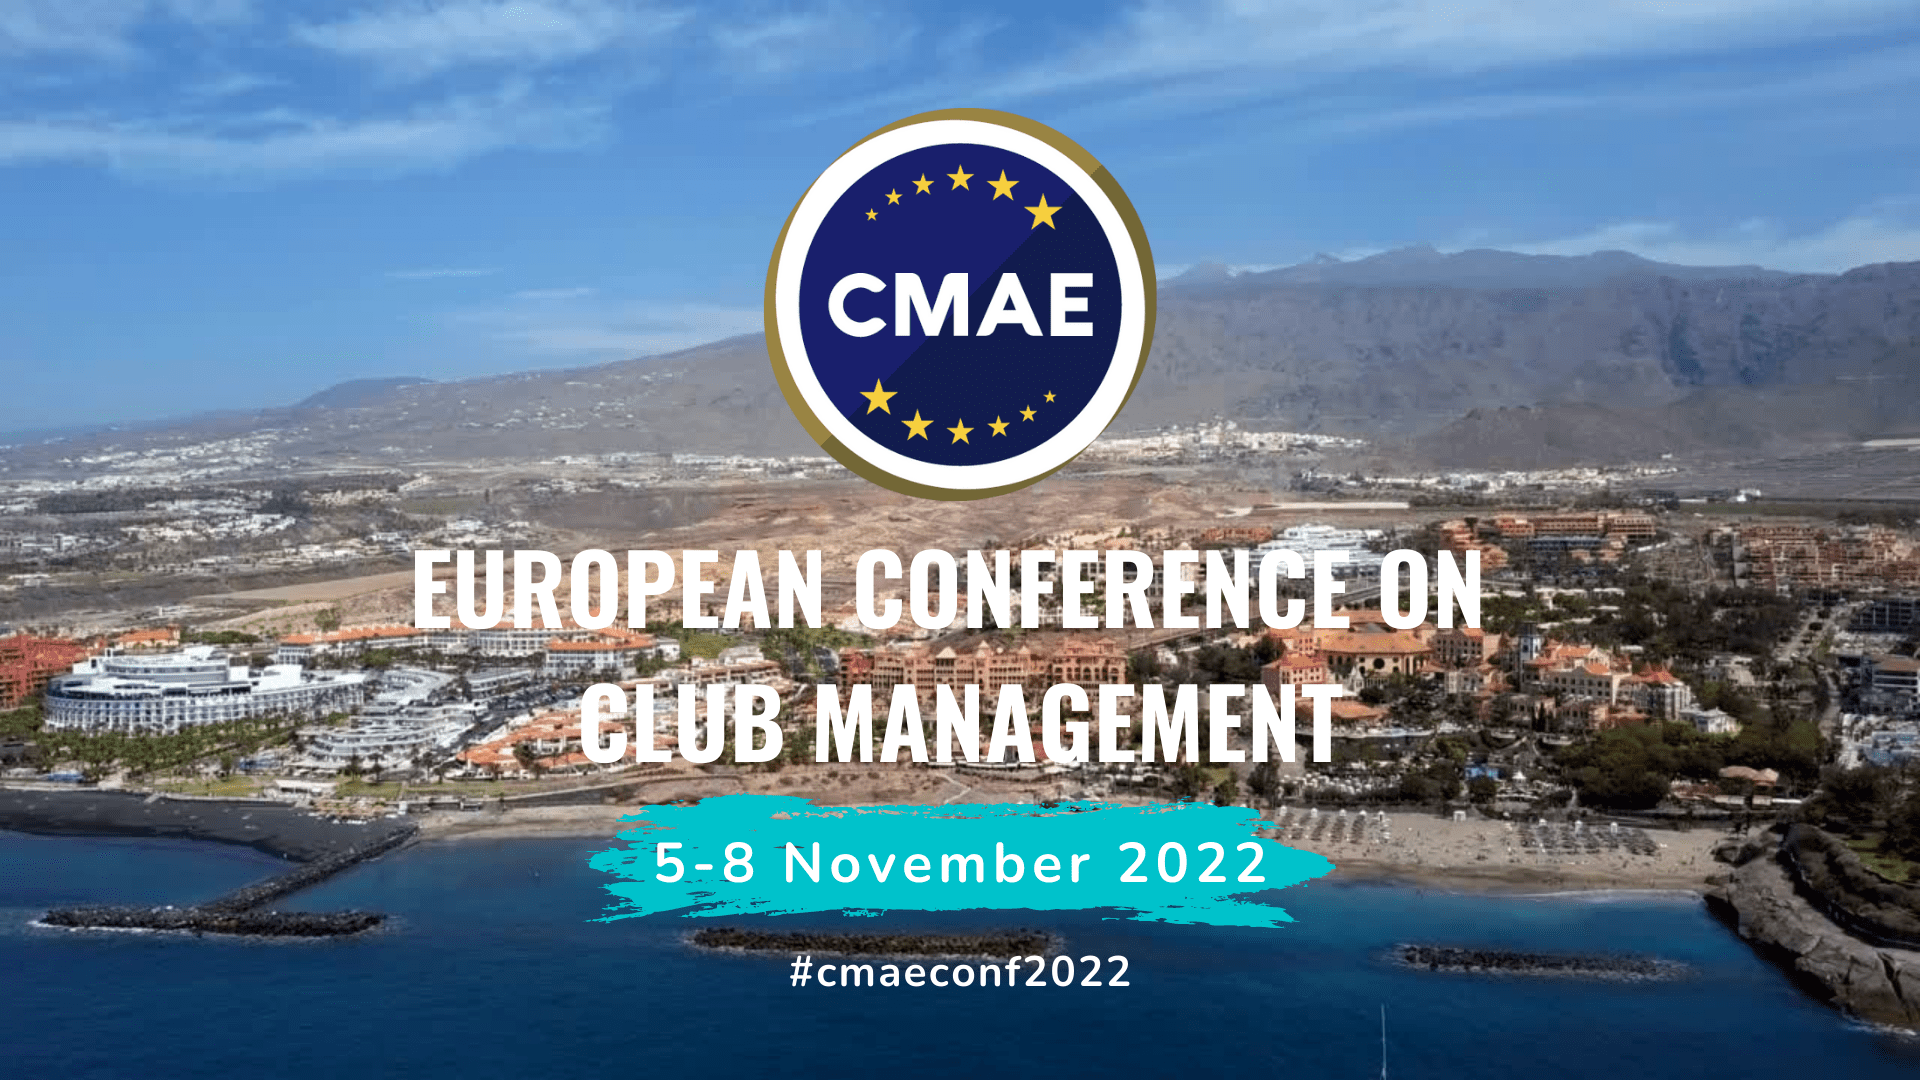 CMAE announce dates for 2022 European Conference on Club Management